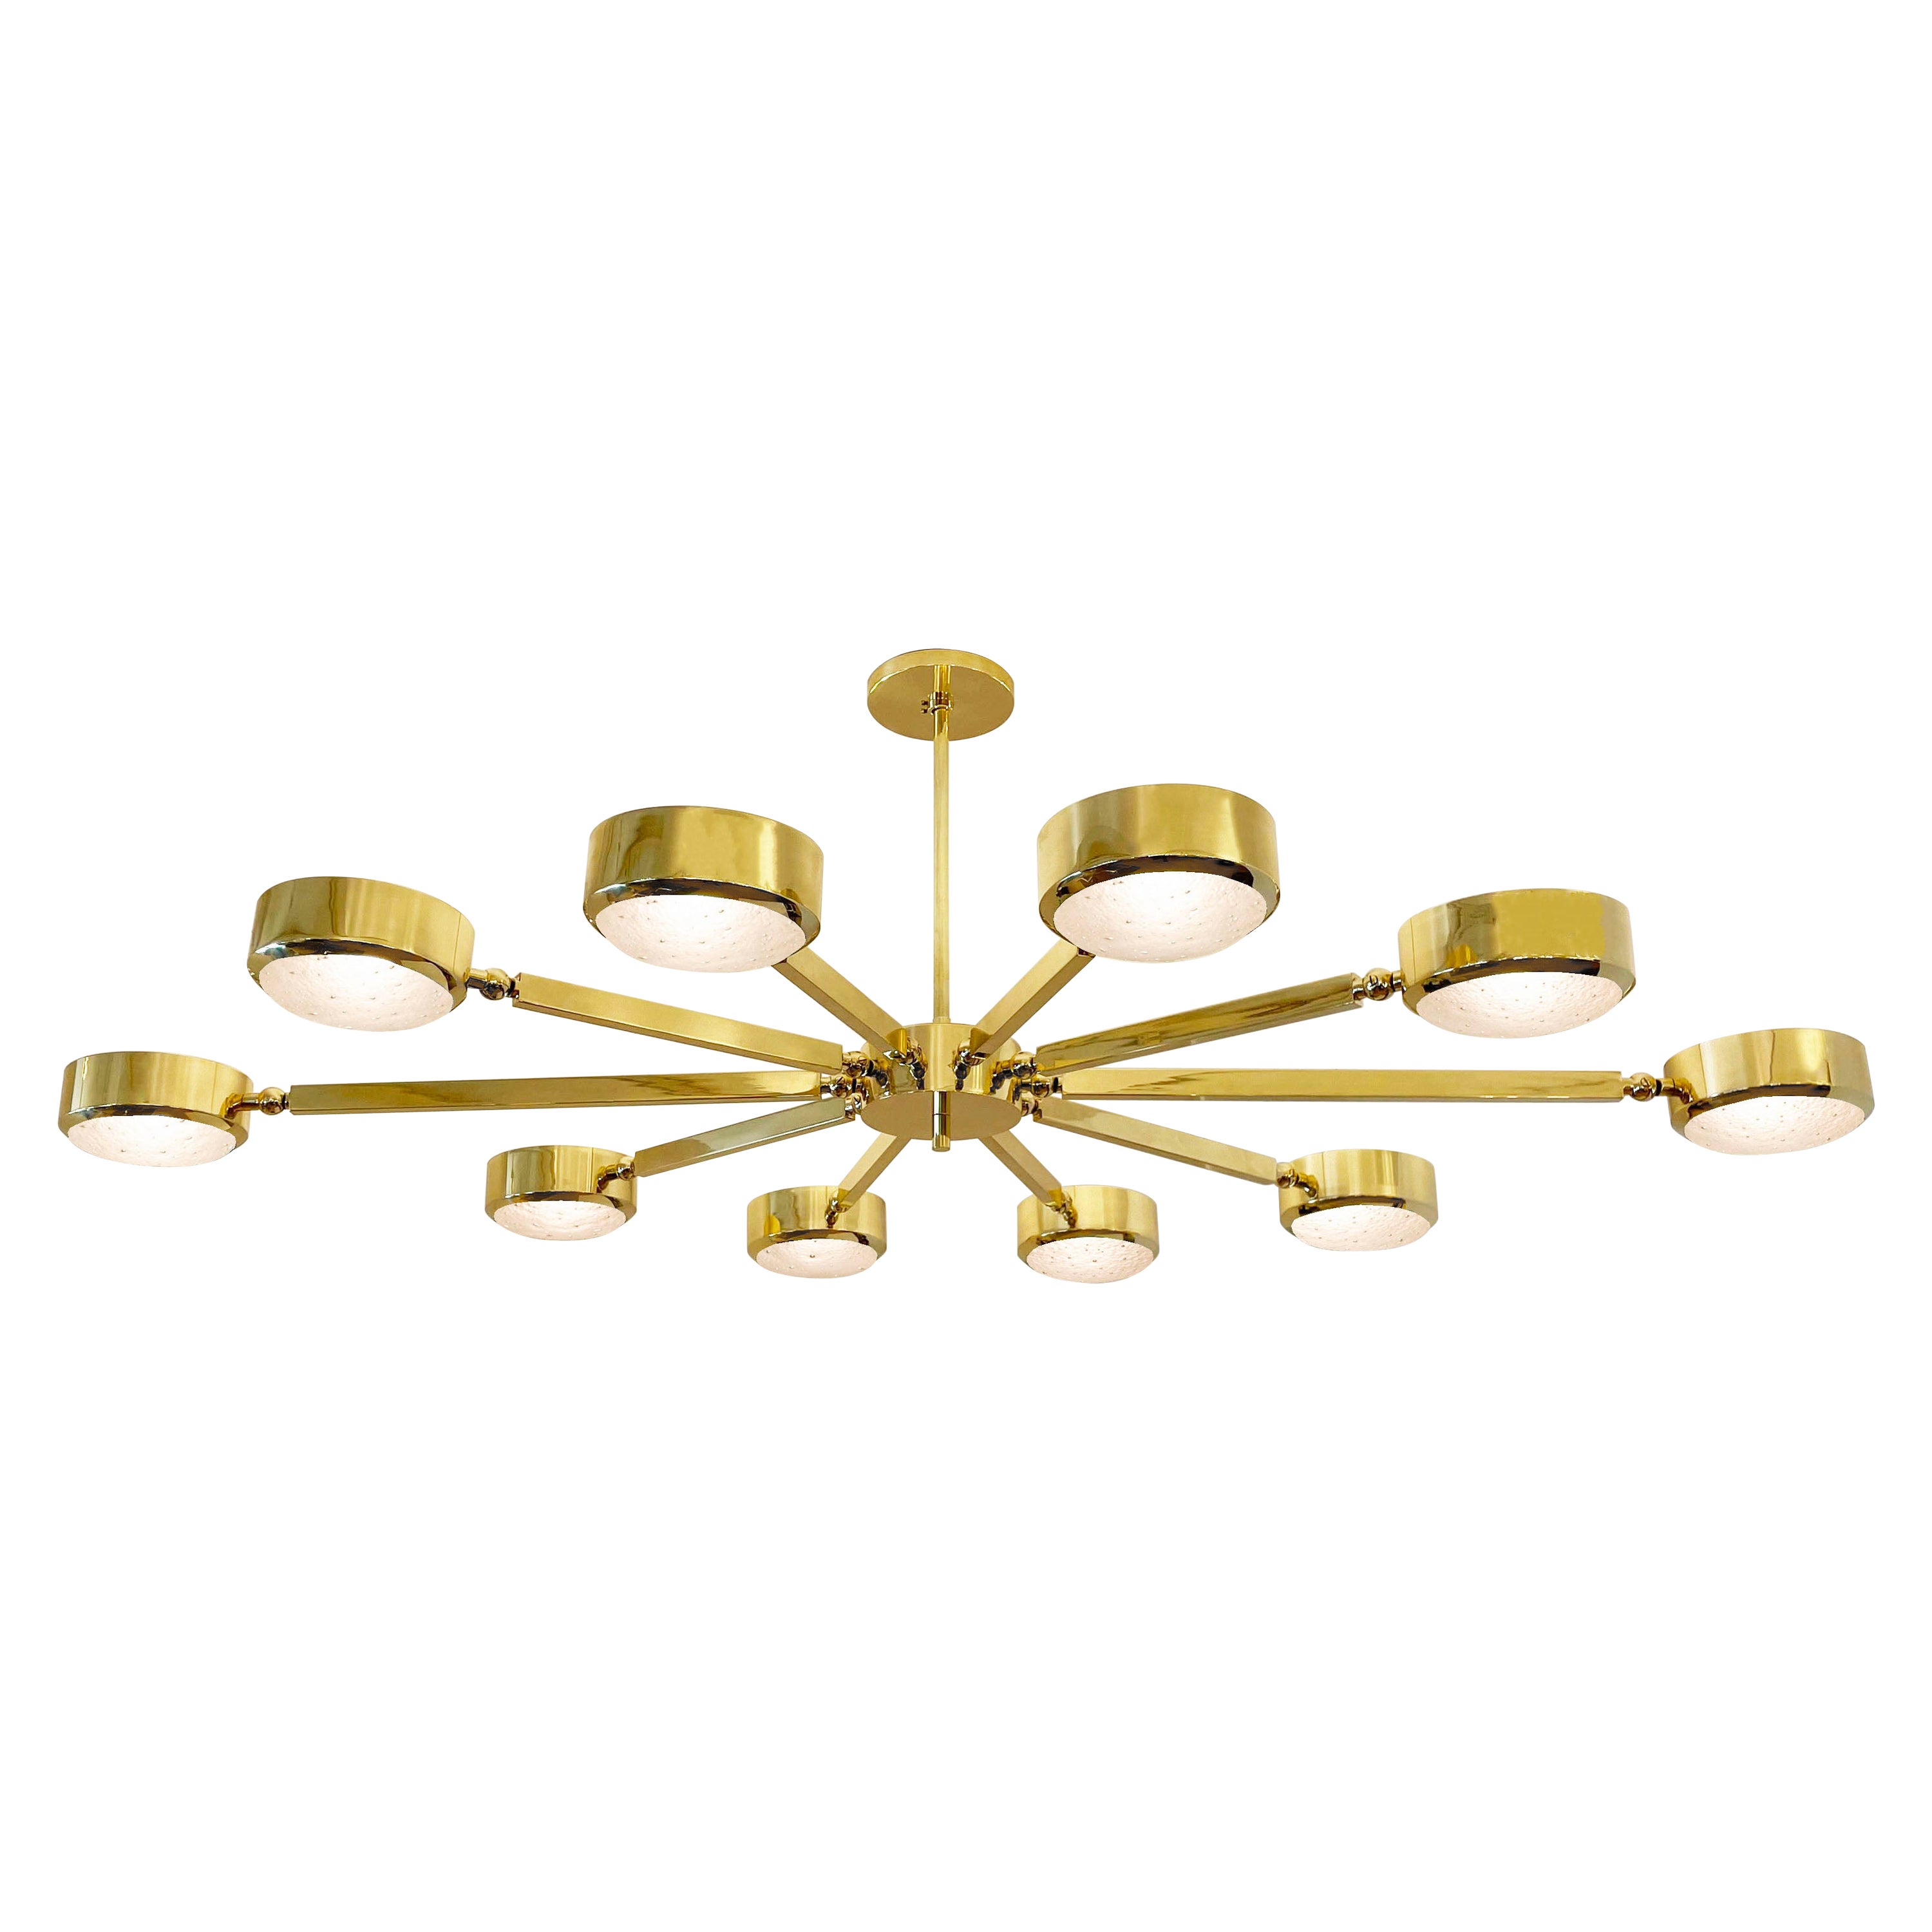 Oval Oculus Articulating Ceiling Light by Gaspare Asaro -Murano Glass